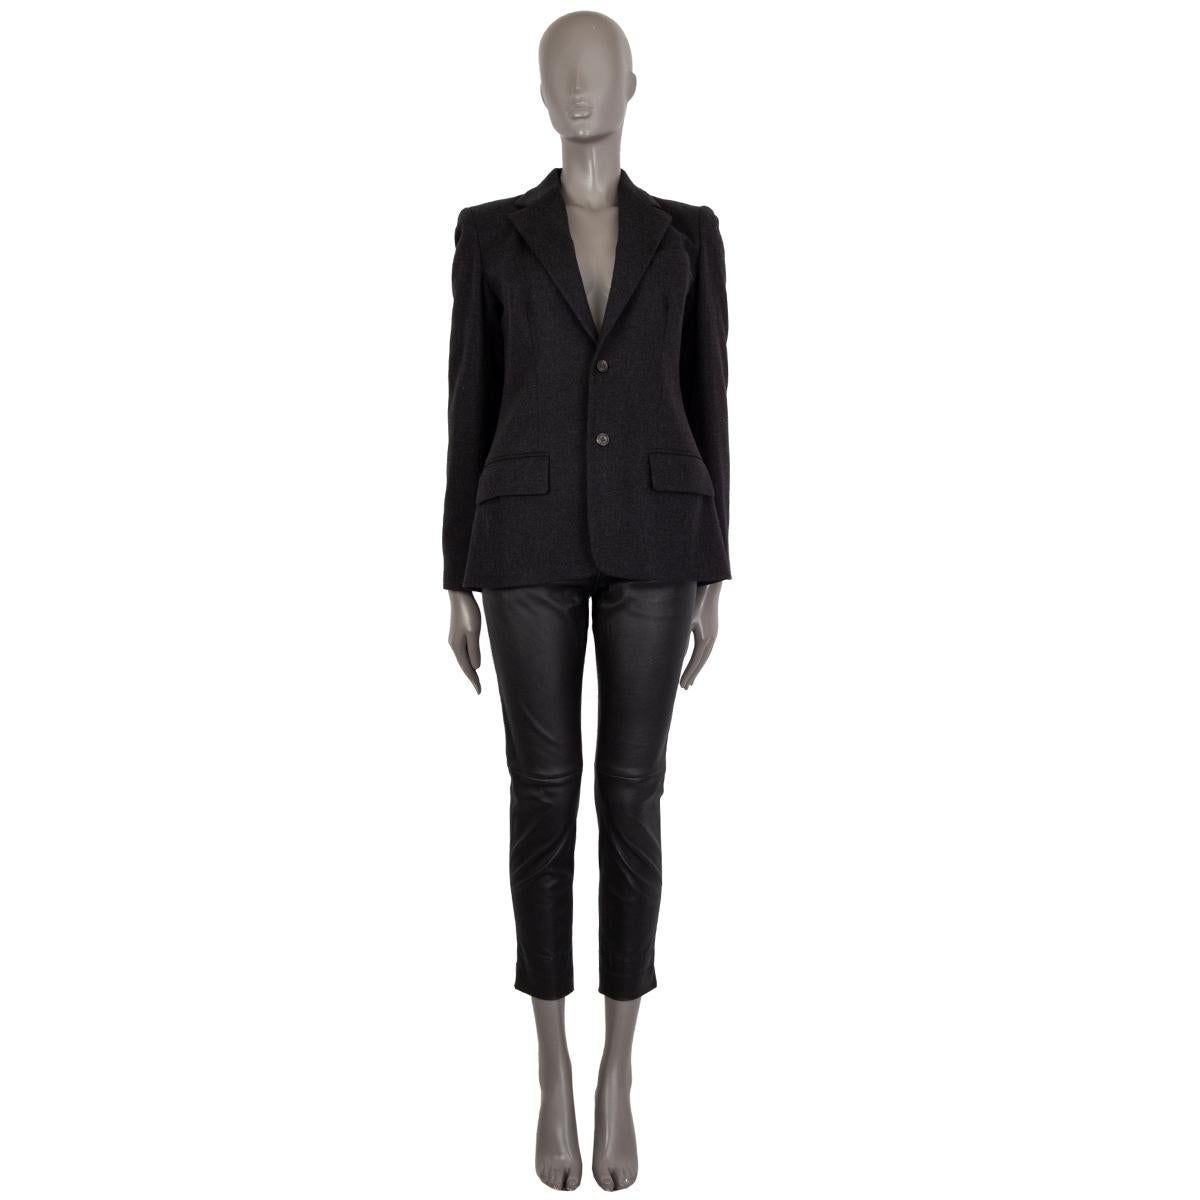 100% authentic Ralph Lauren blazer in charcoal wool (85%), angora (5%), cashmere (4%), nylon (4%), and elastane (2%). With notch collar, chest pocket, two flap pockets on the sides, buttoned sleeves, and slit on the back. Closes with two dark horn